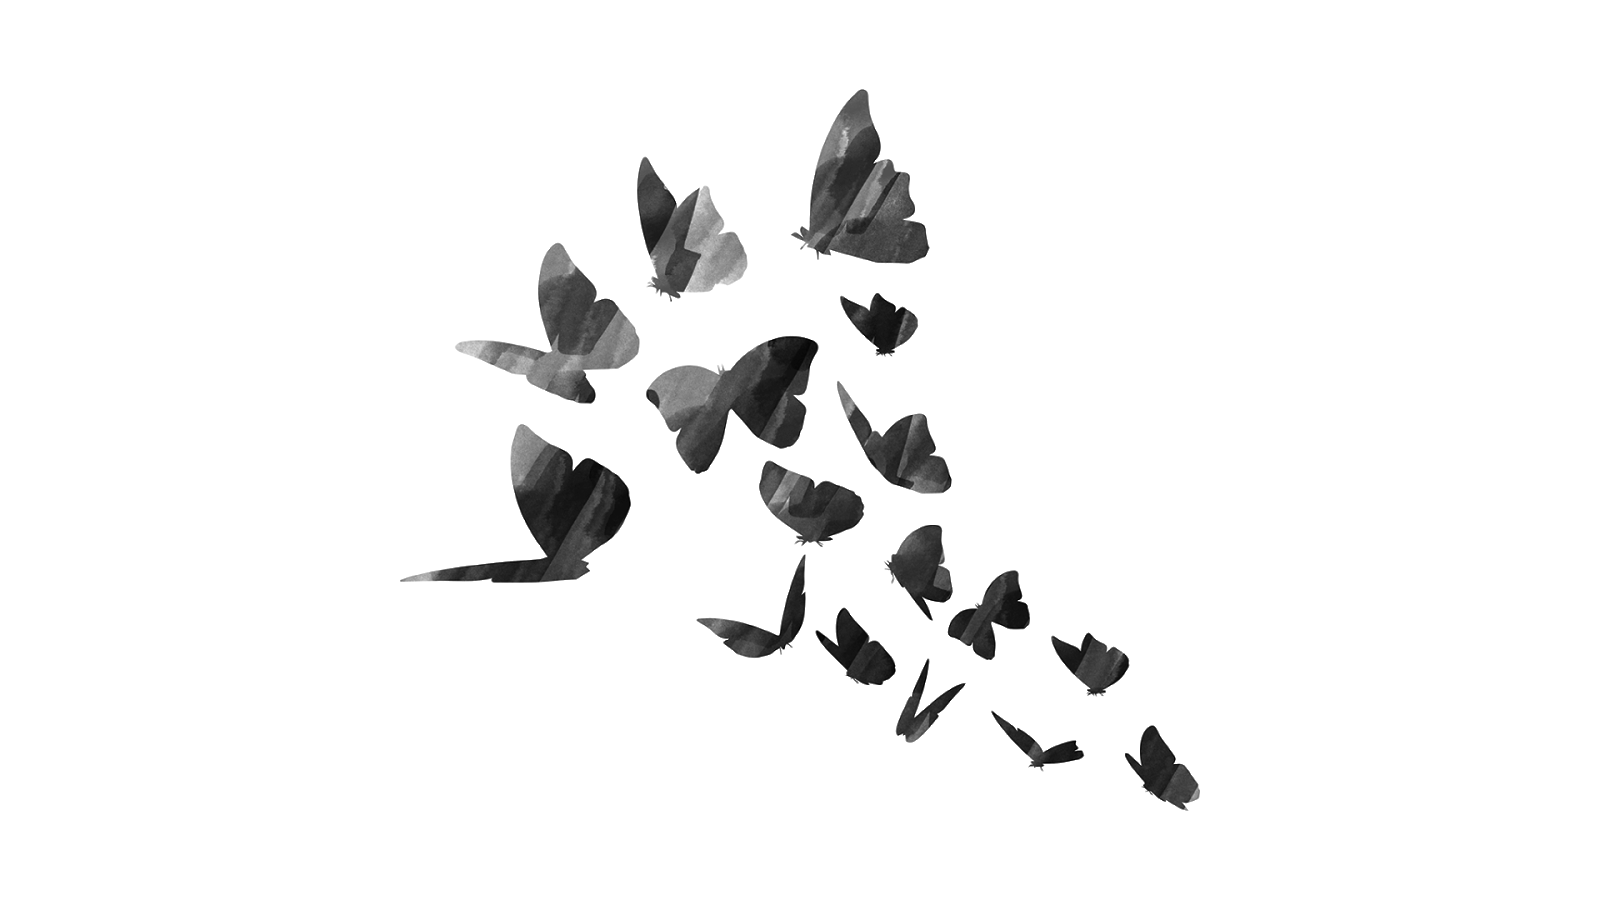 A group of black butterflies on a green background - Wings